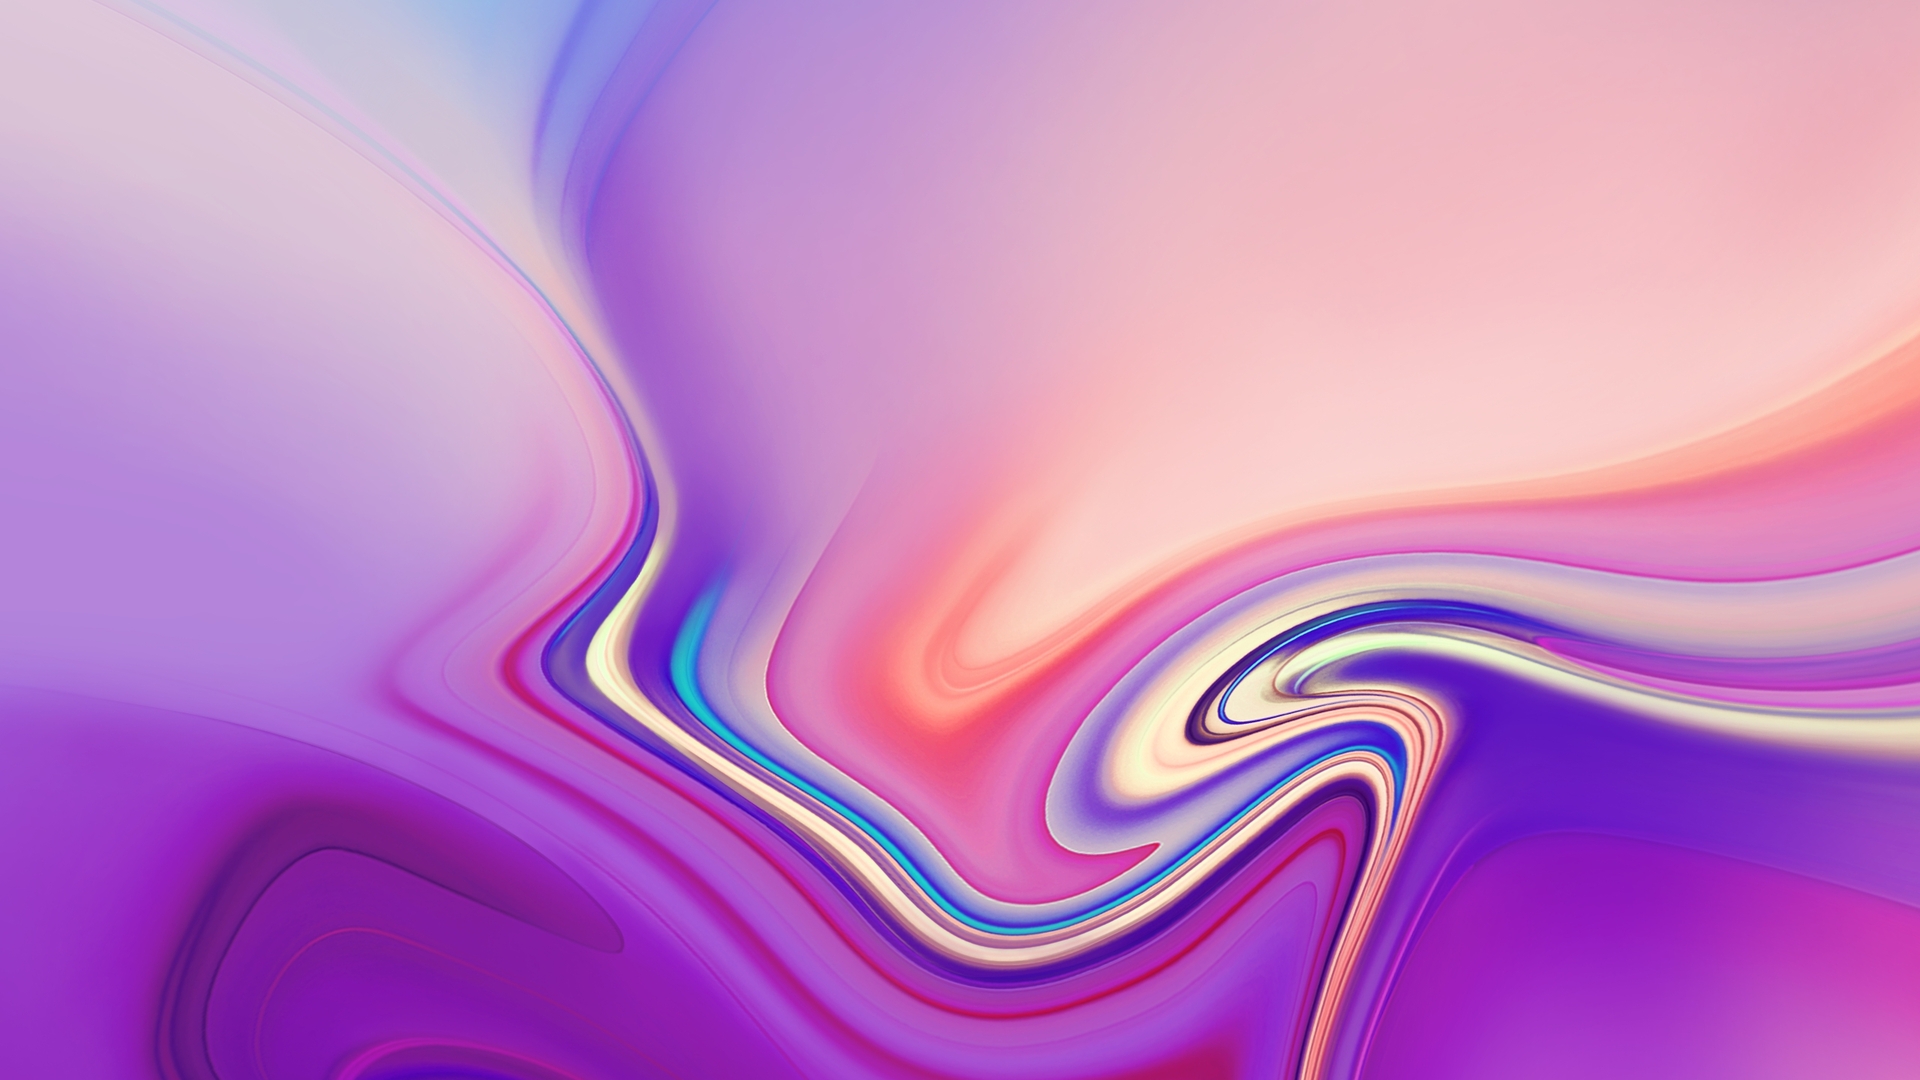 Wallpaper Note 9 Wallpapers